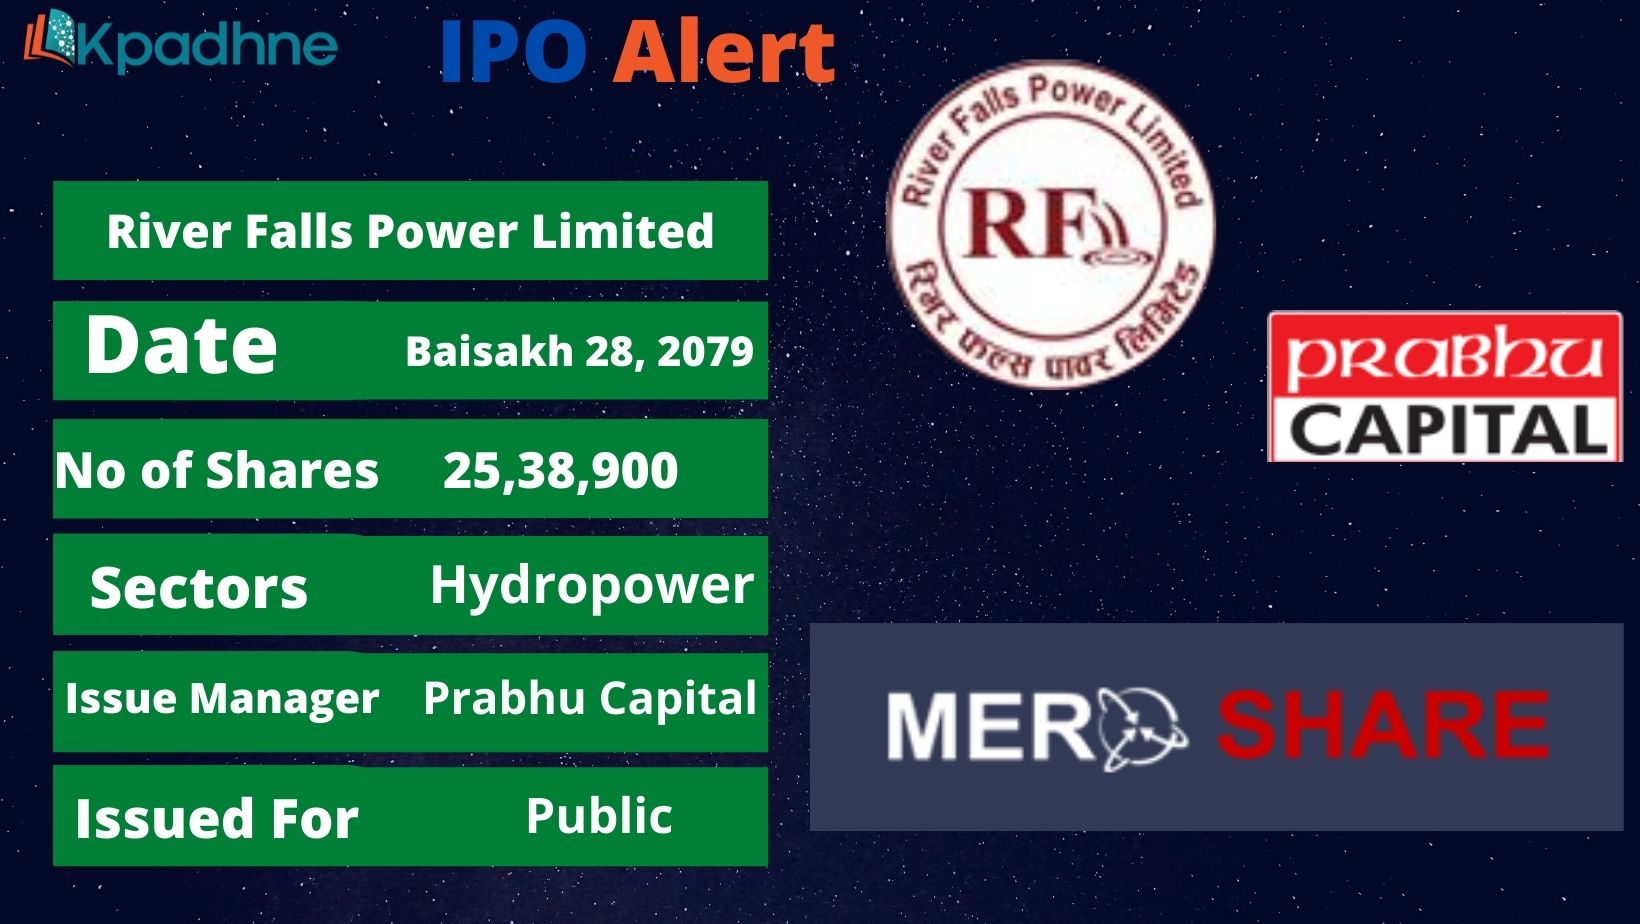 River Falls Power Limited- IPO Alert